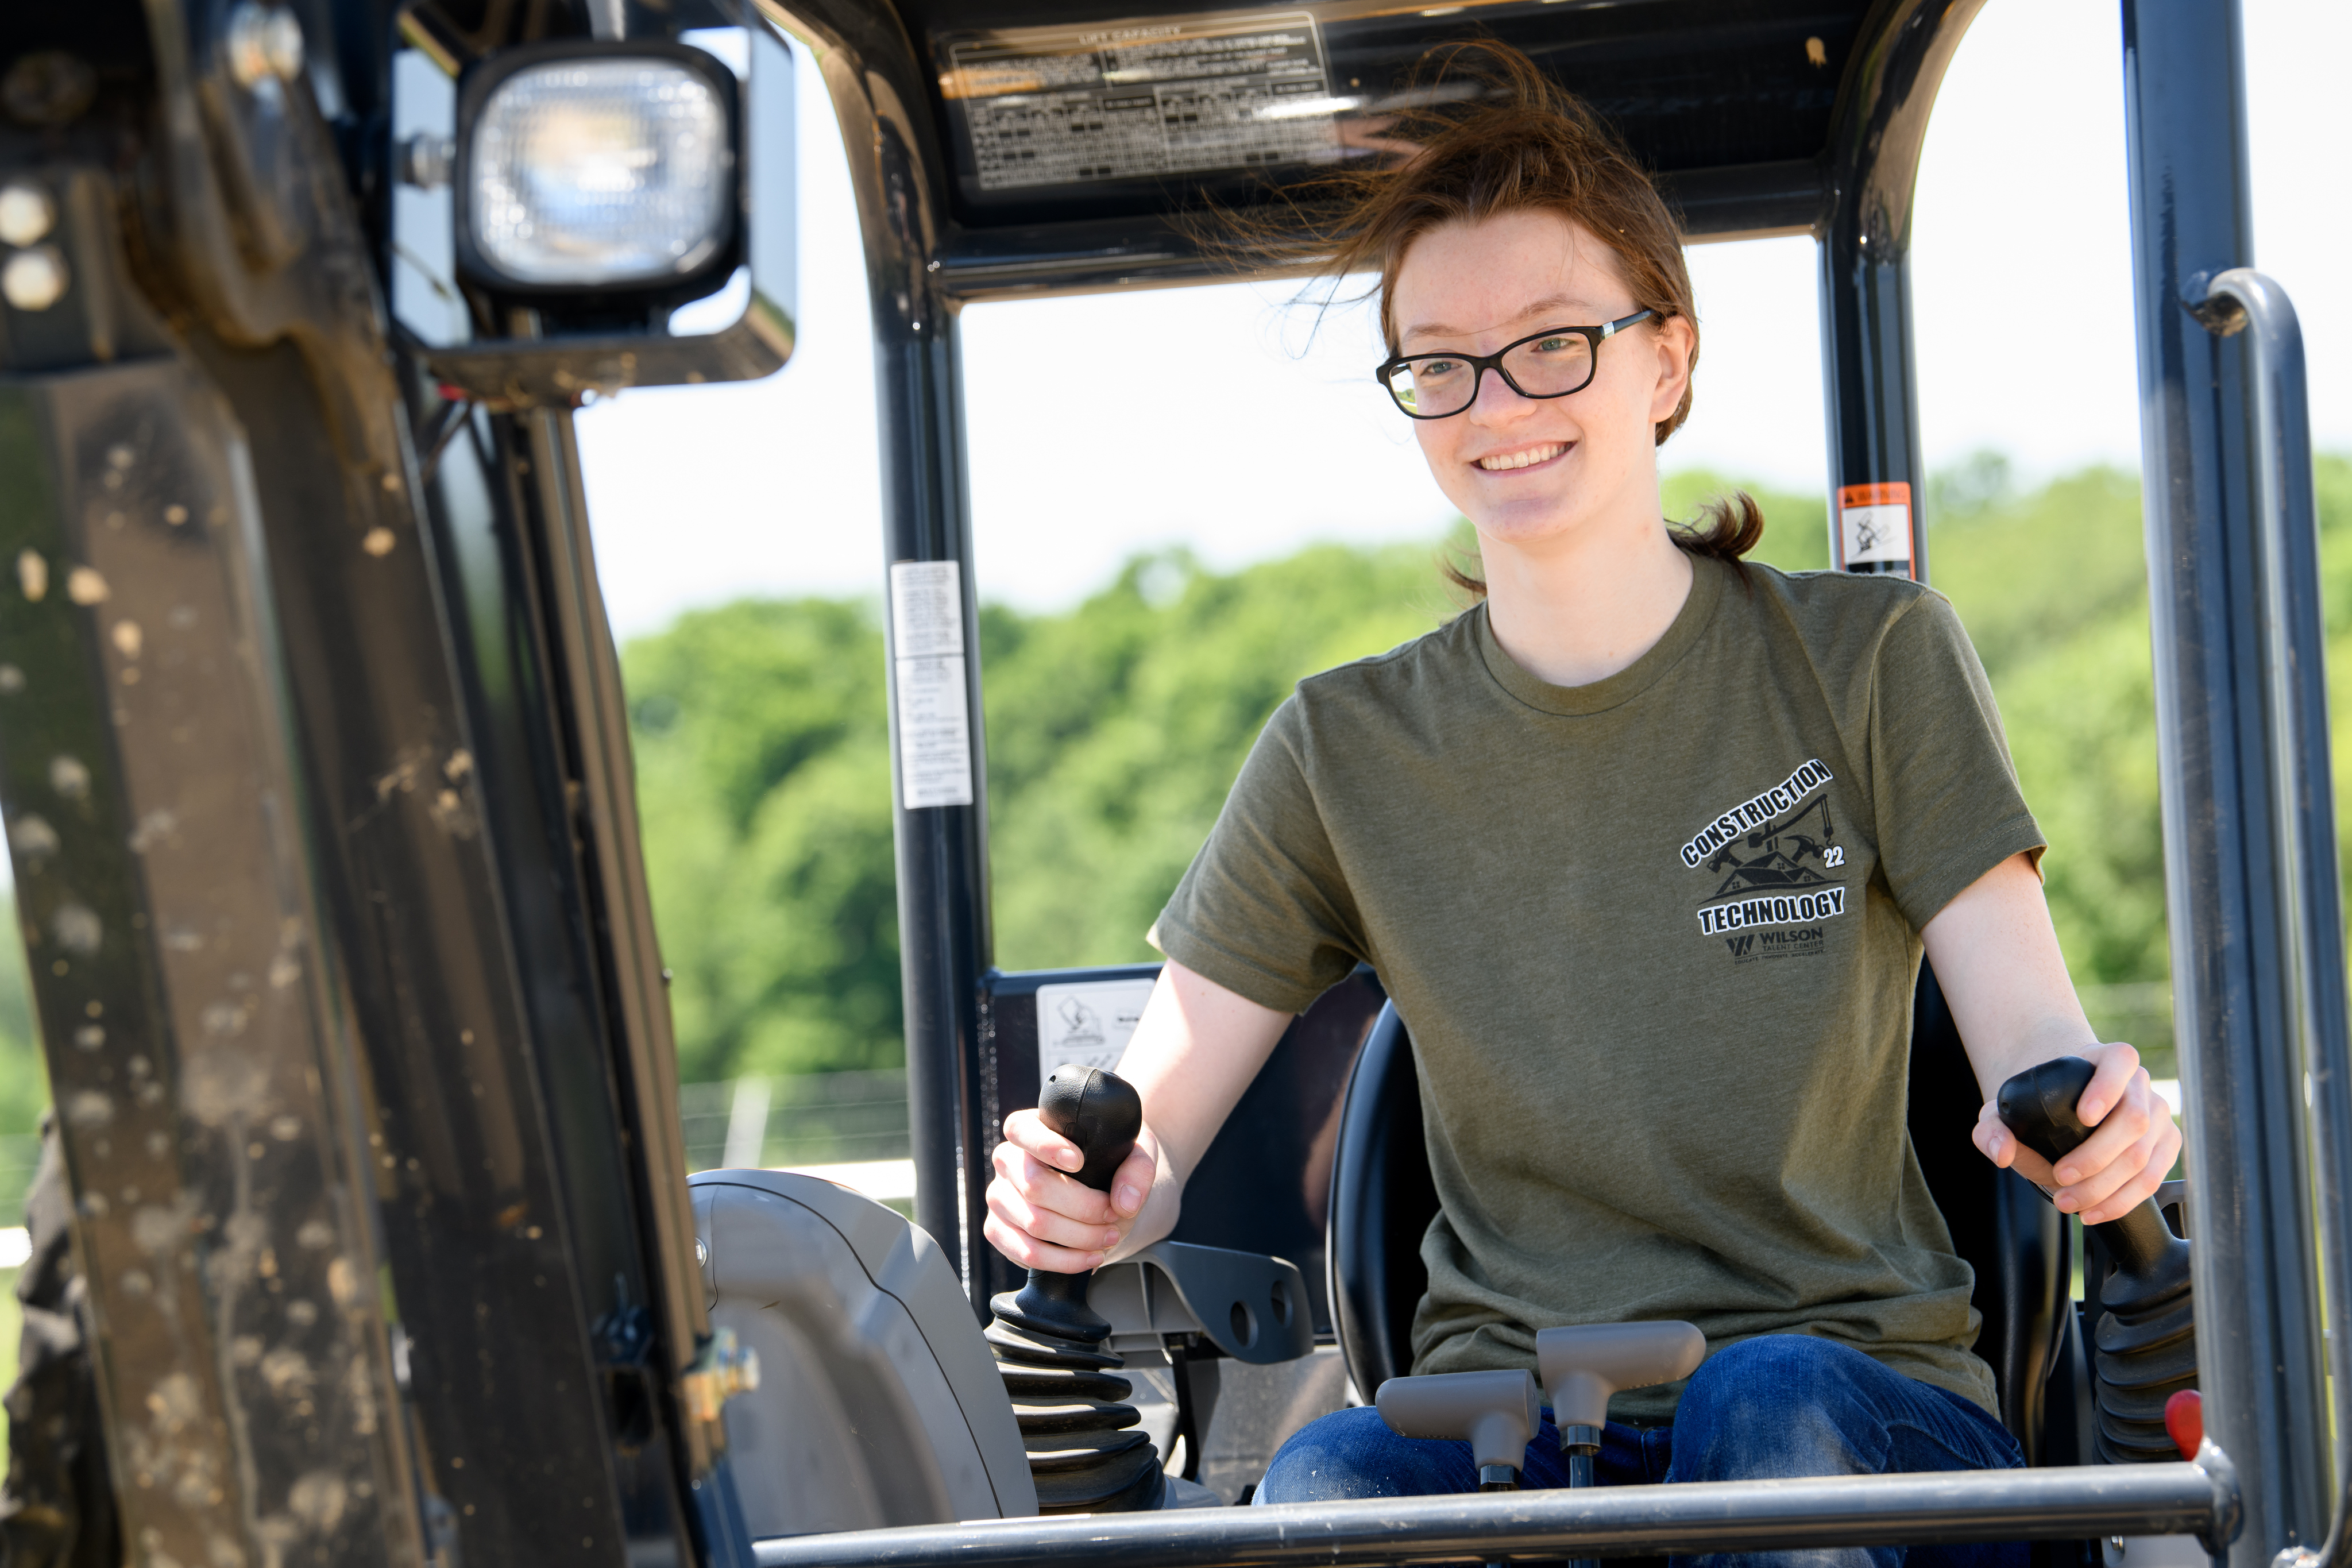 Female construction student sits in the cab of the forklift ready to dig up some dirt.